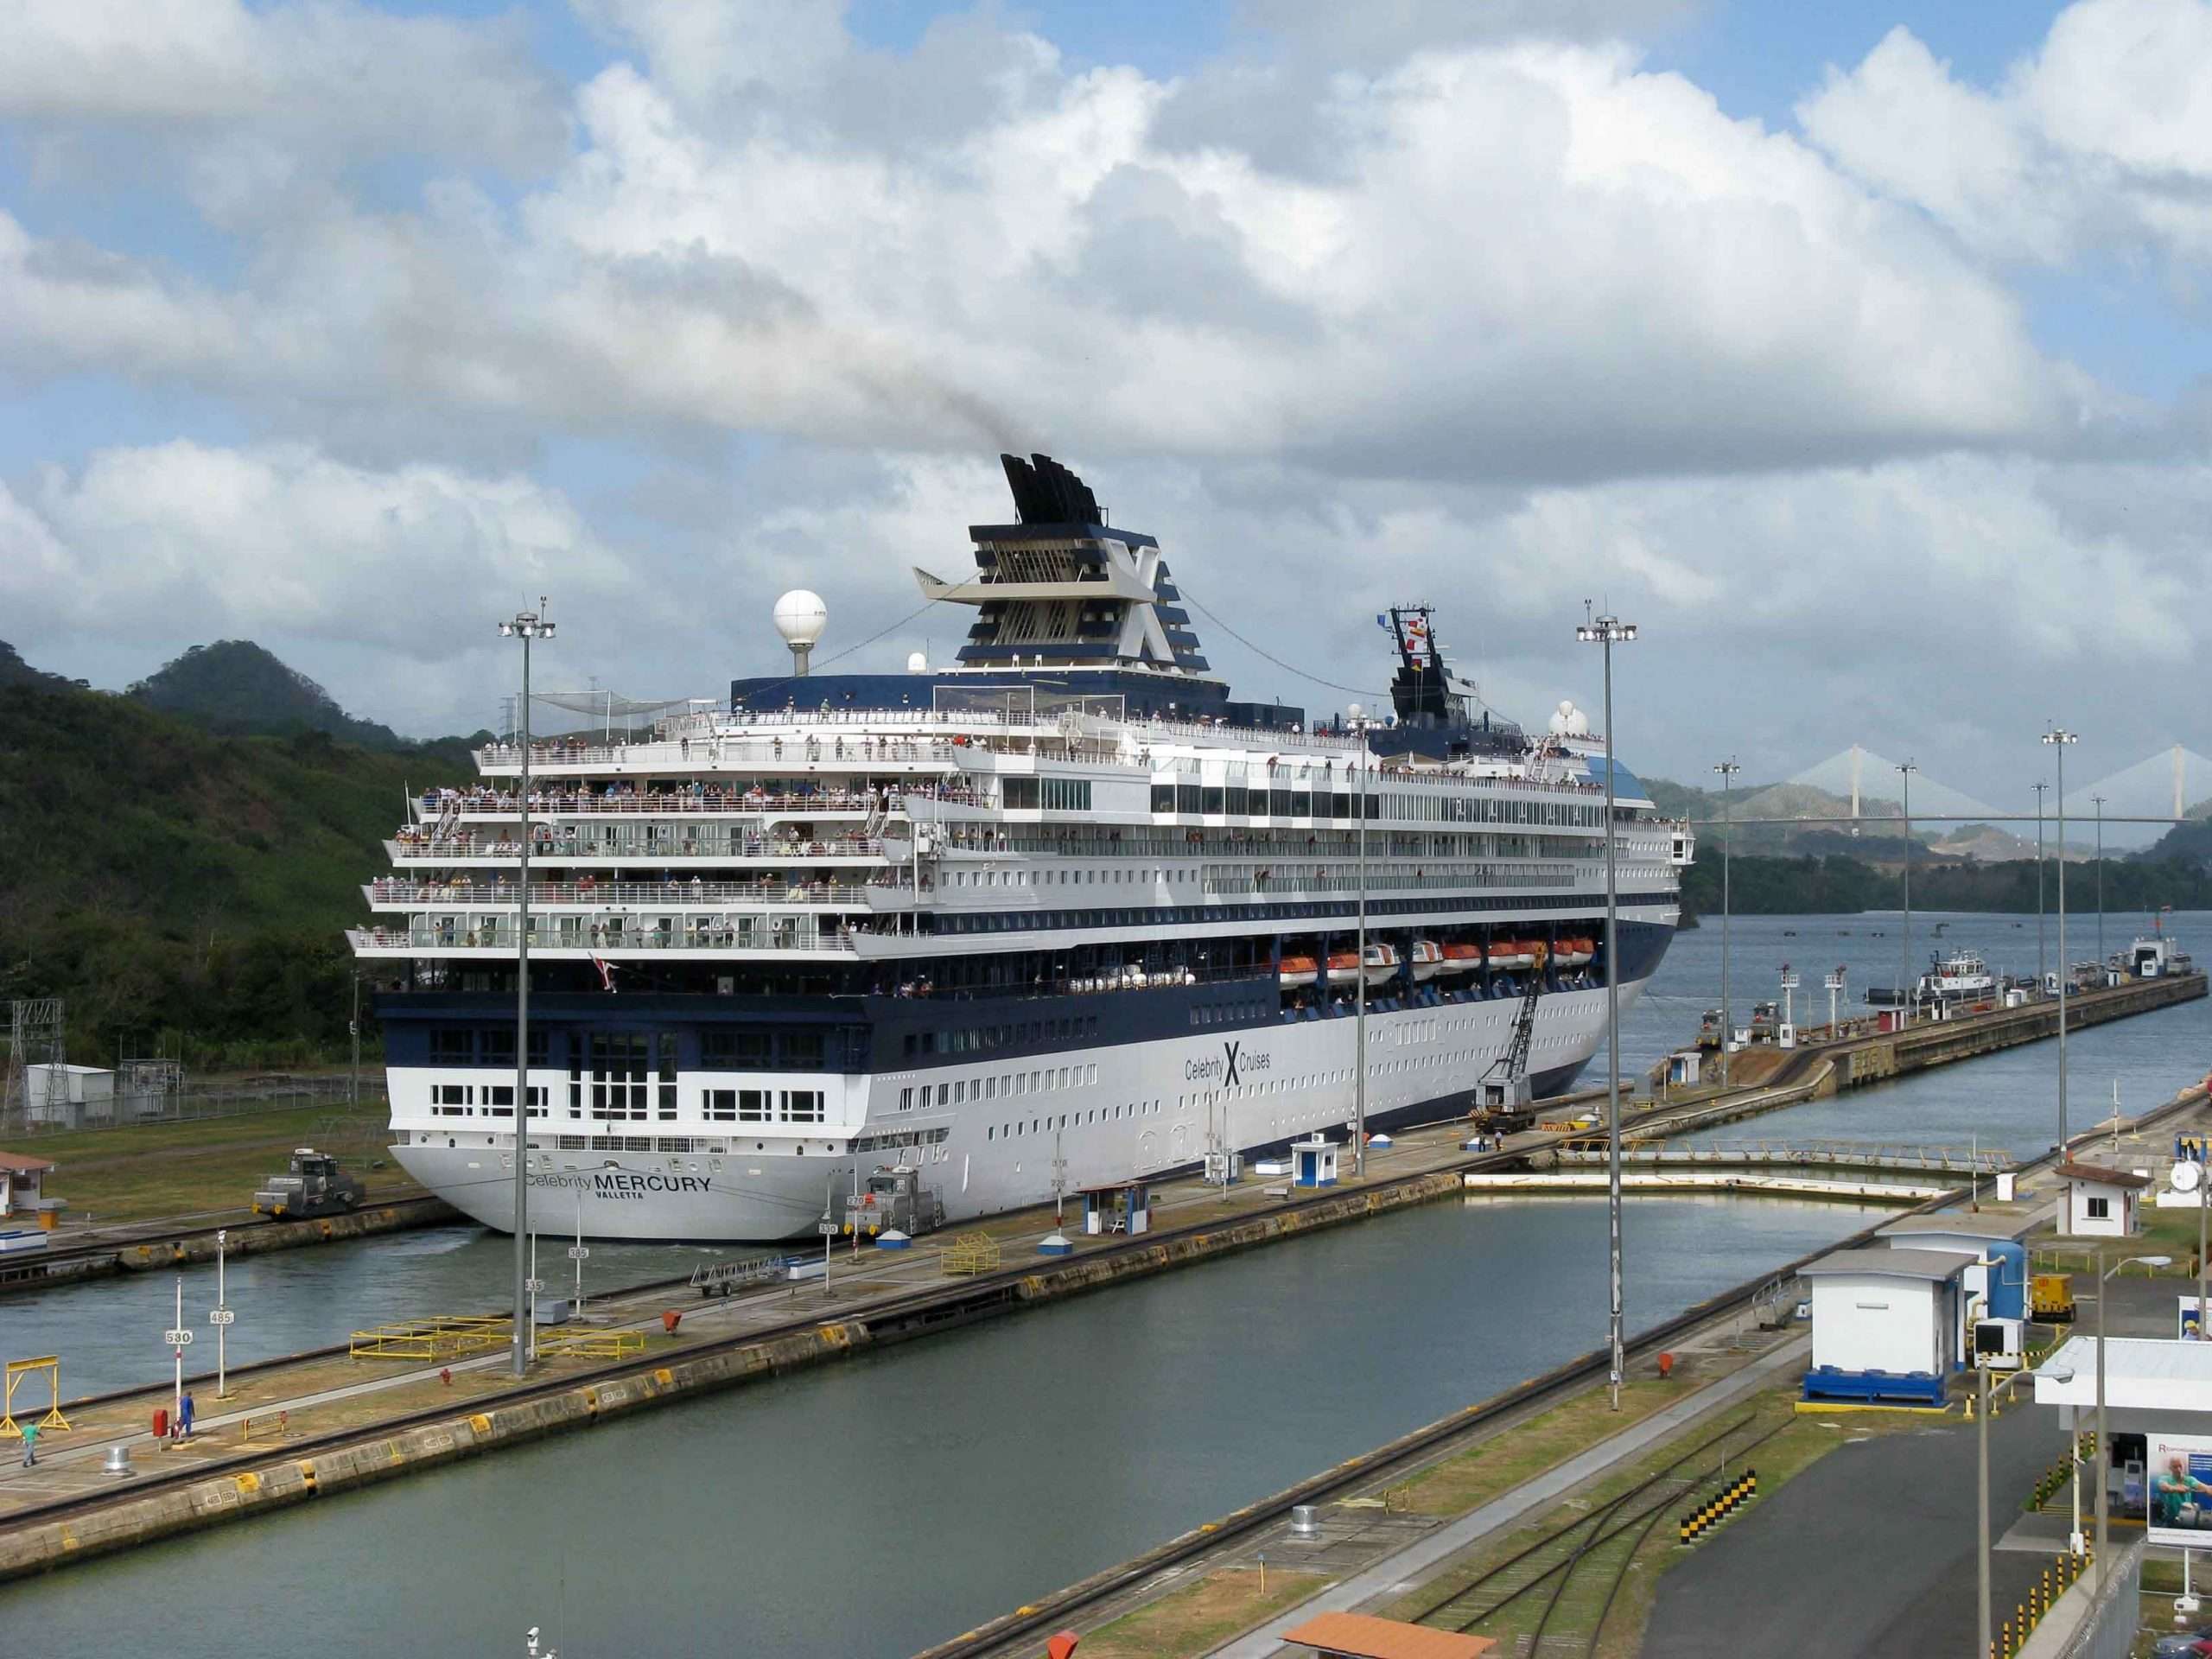 Travel on a cruise ship through the locks in Panama ...